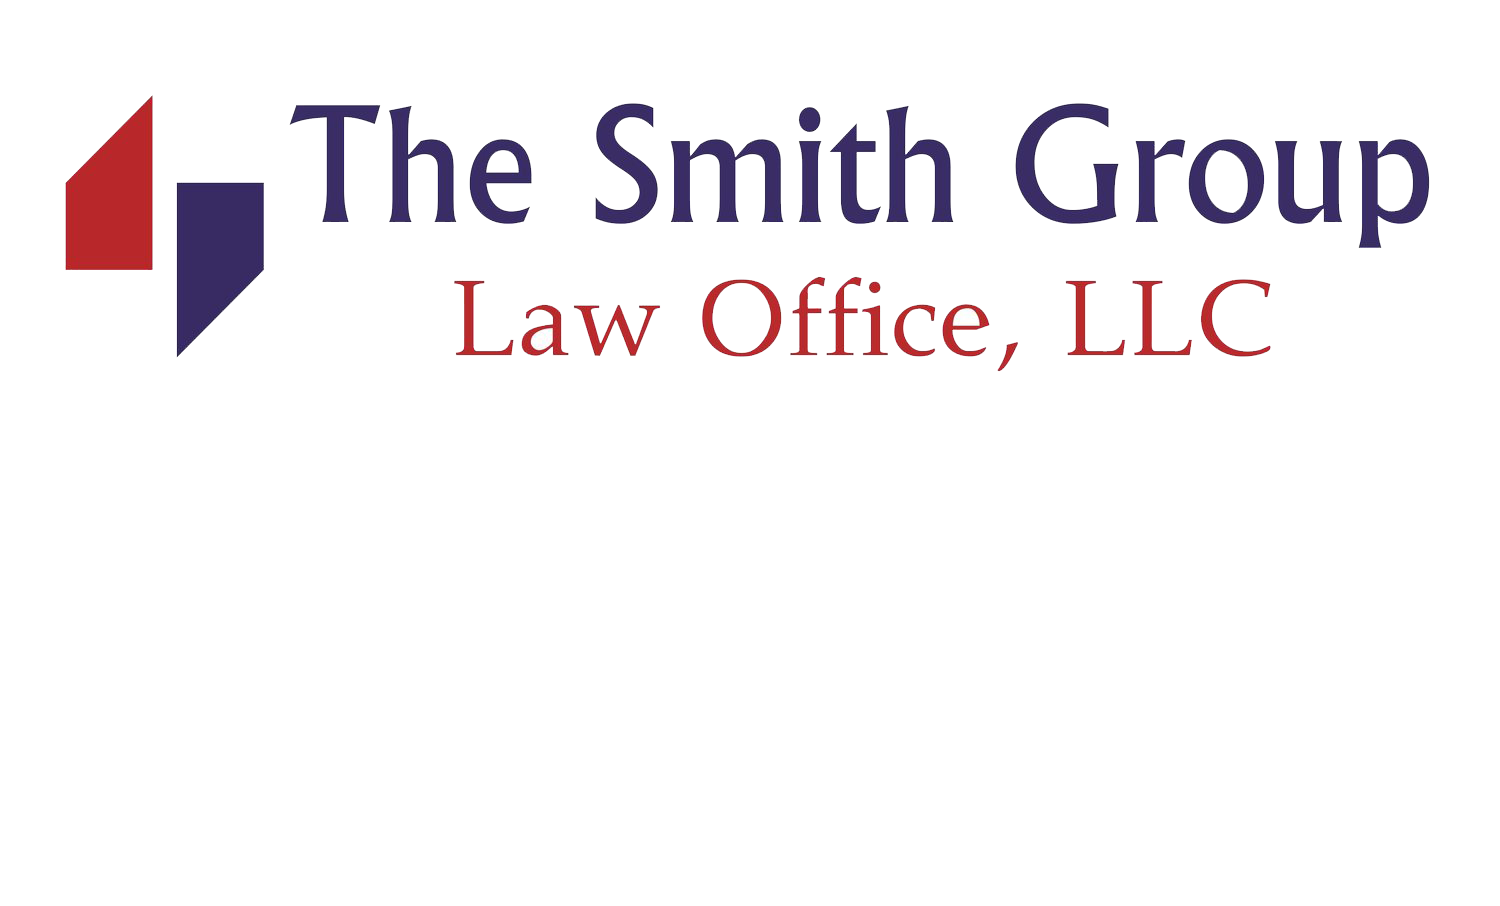 The Smith Group Law Office, LLC